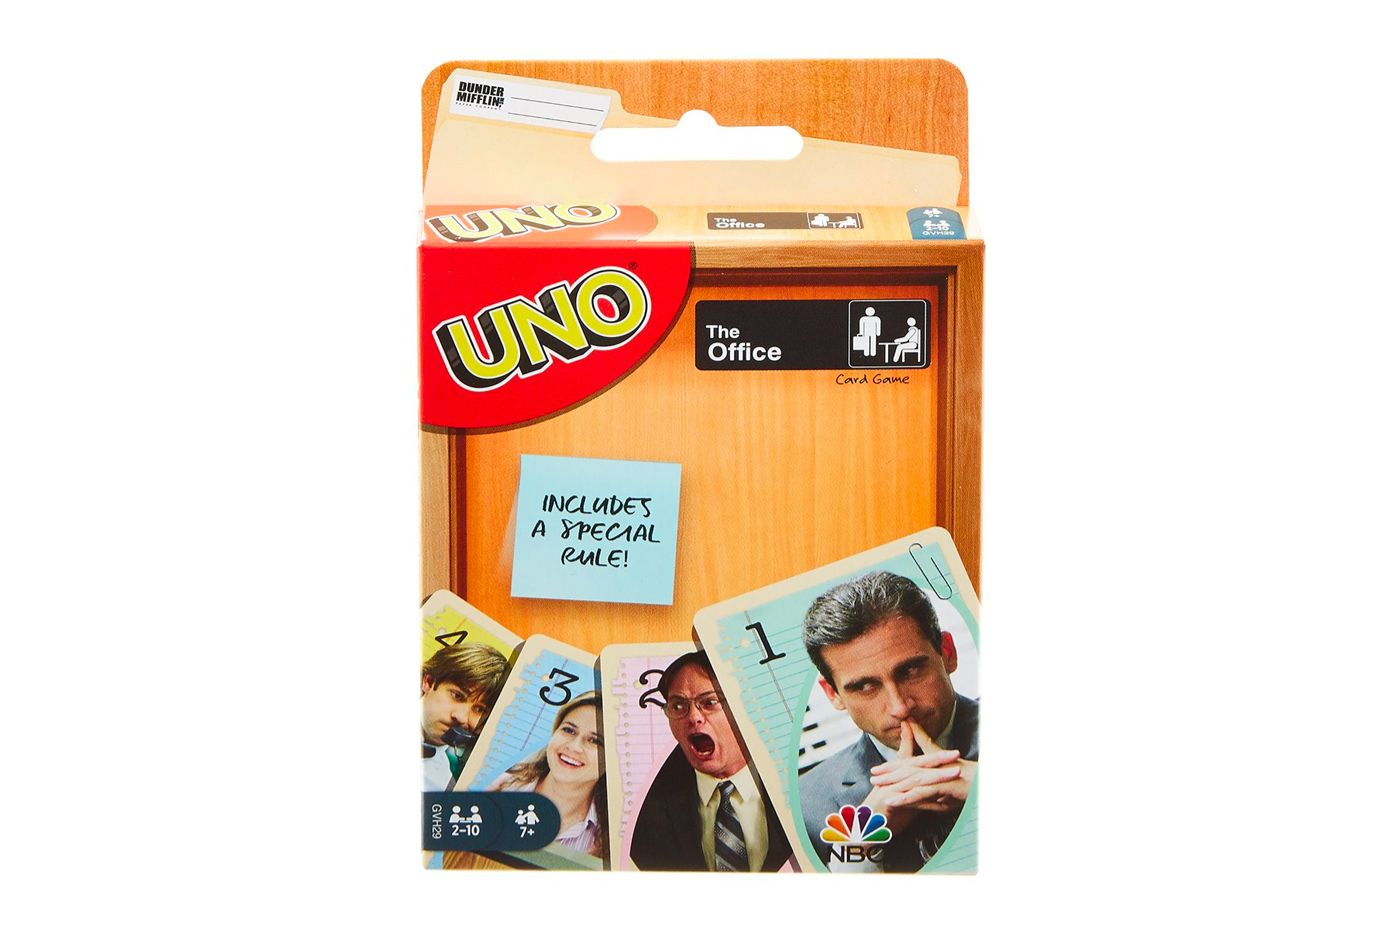 The Office UNO card game box